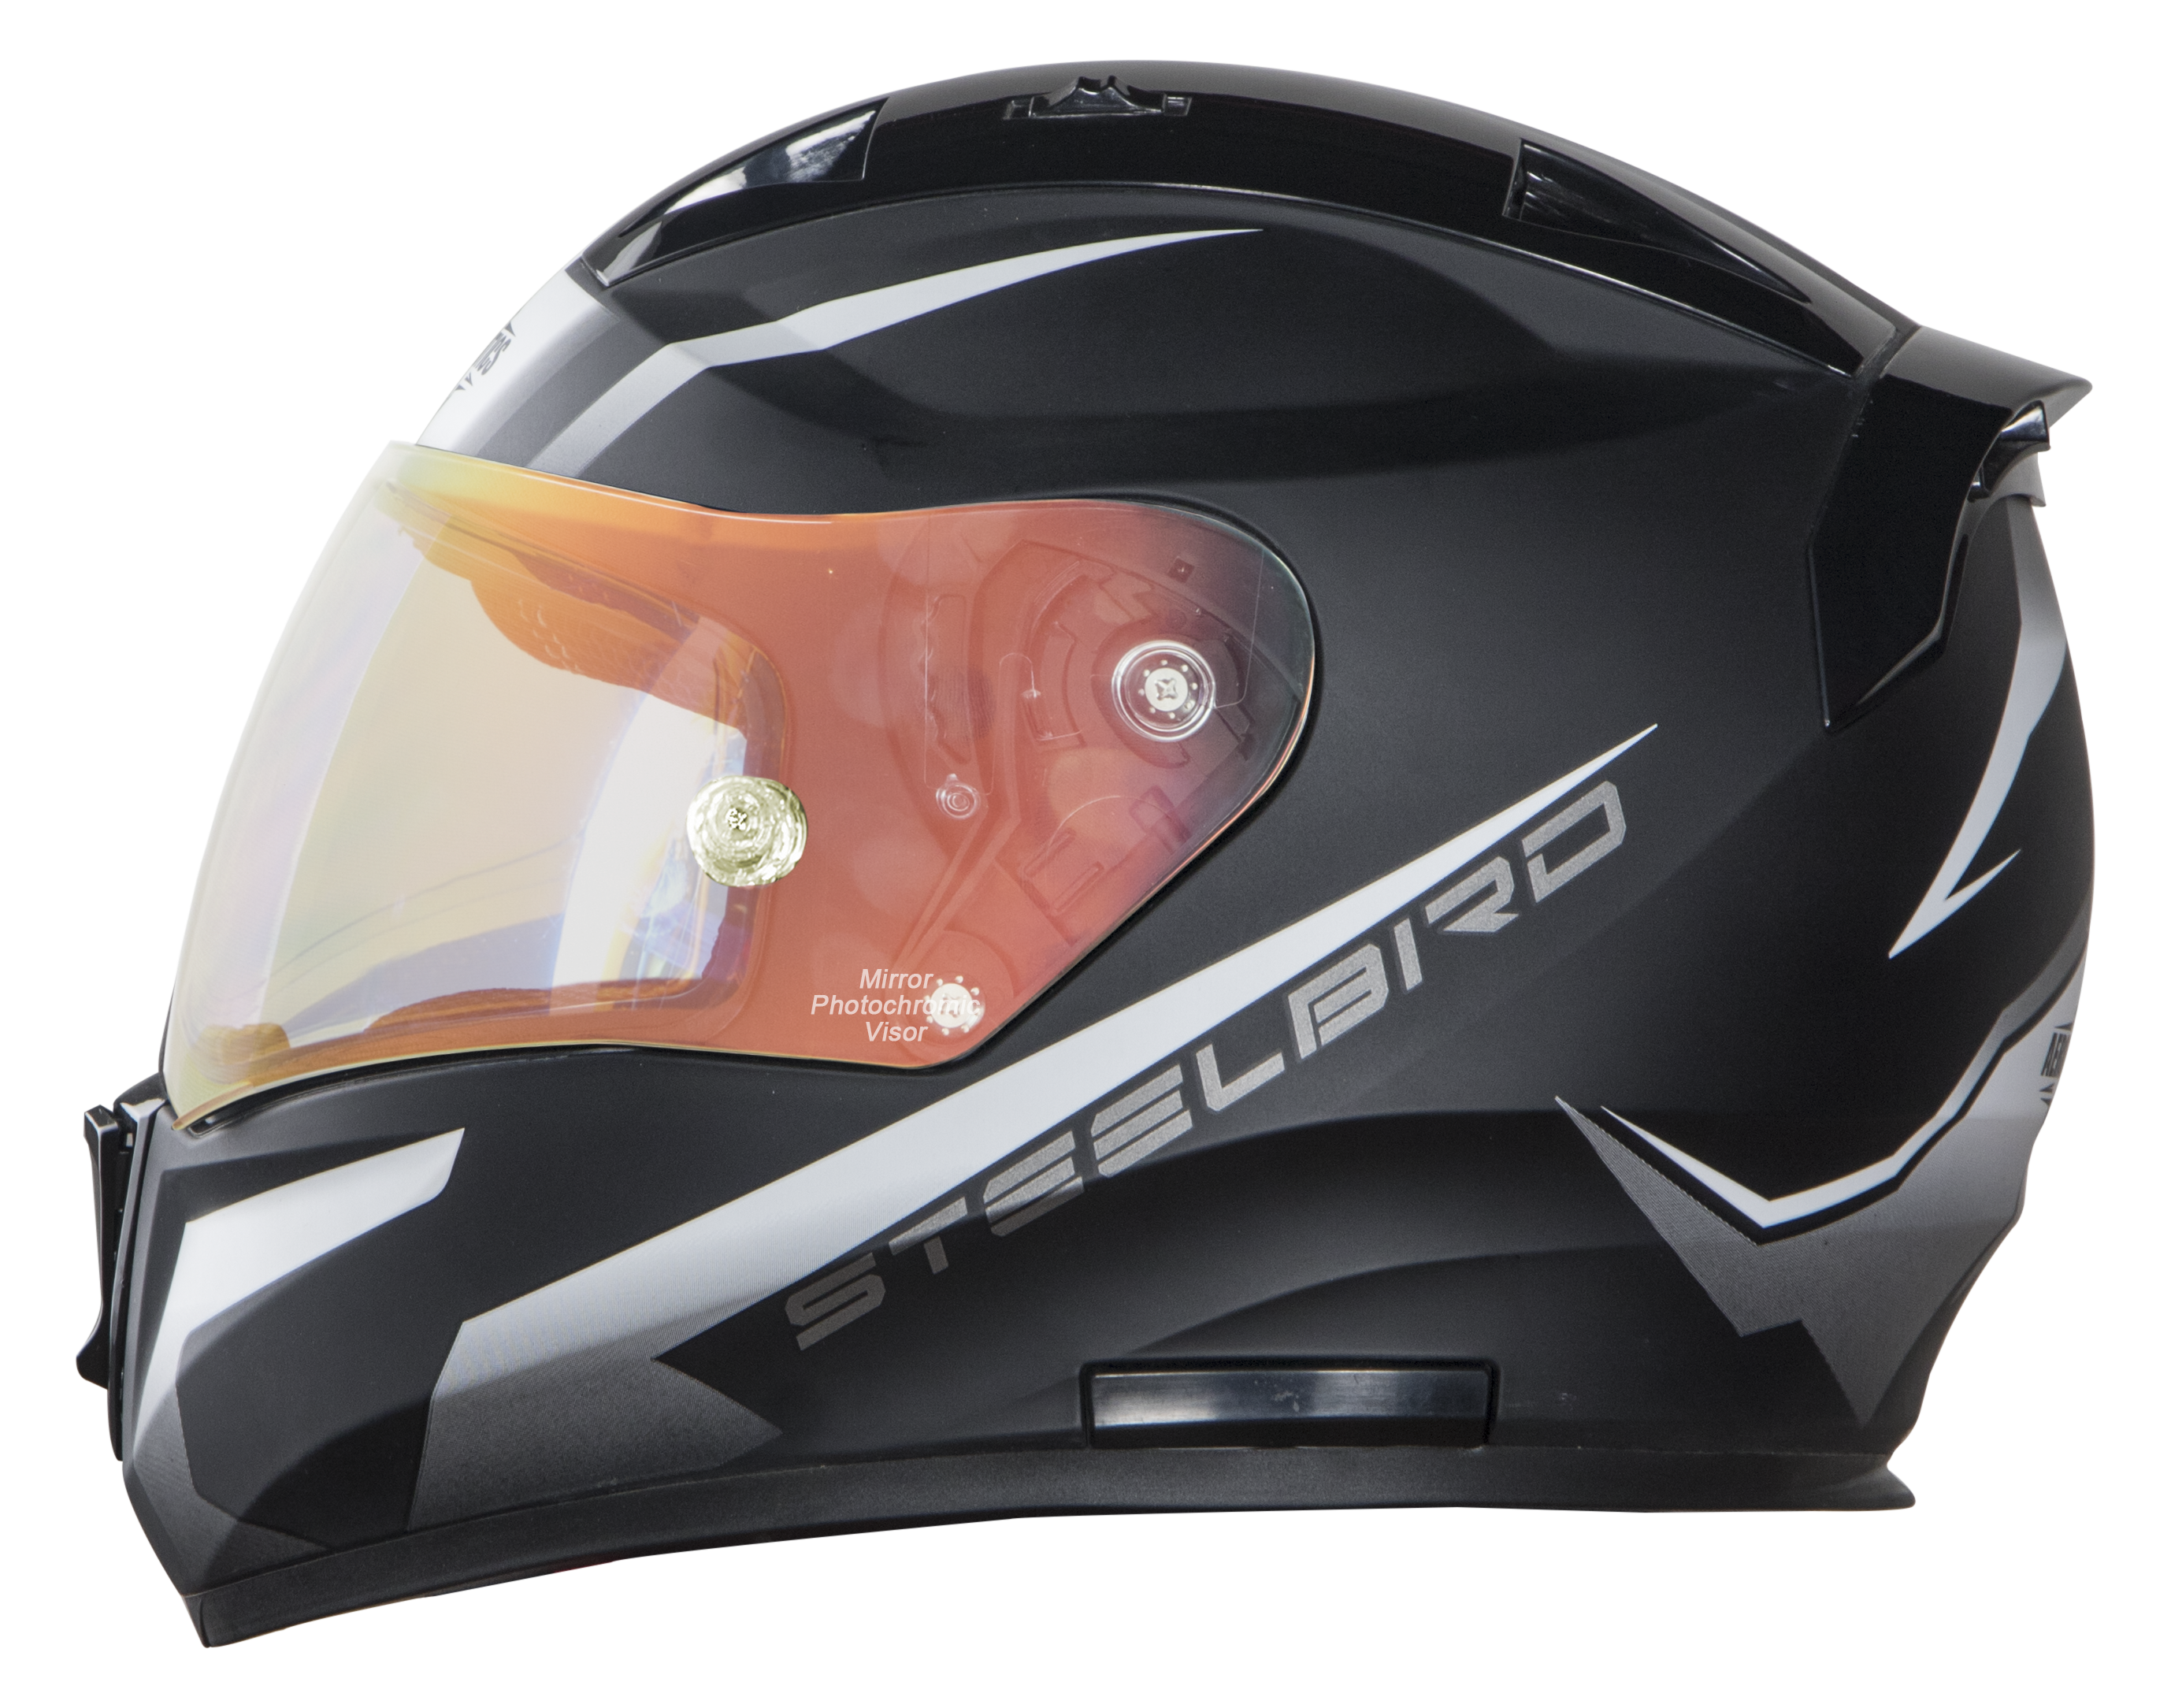 SA-1 WHIF Mat Black/White (Fitted With Clear Visor Extra Anti-Fog Shield Gold Night Vision Photochromic Visor Free)